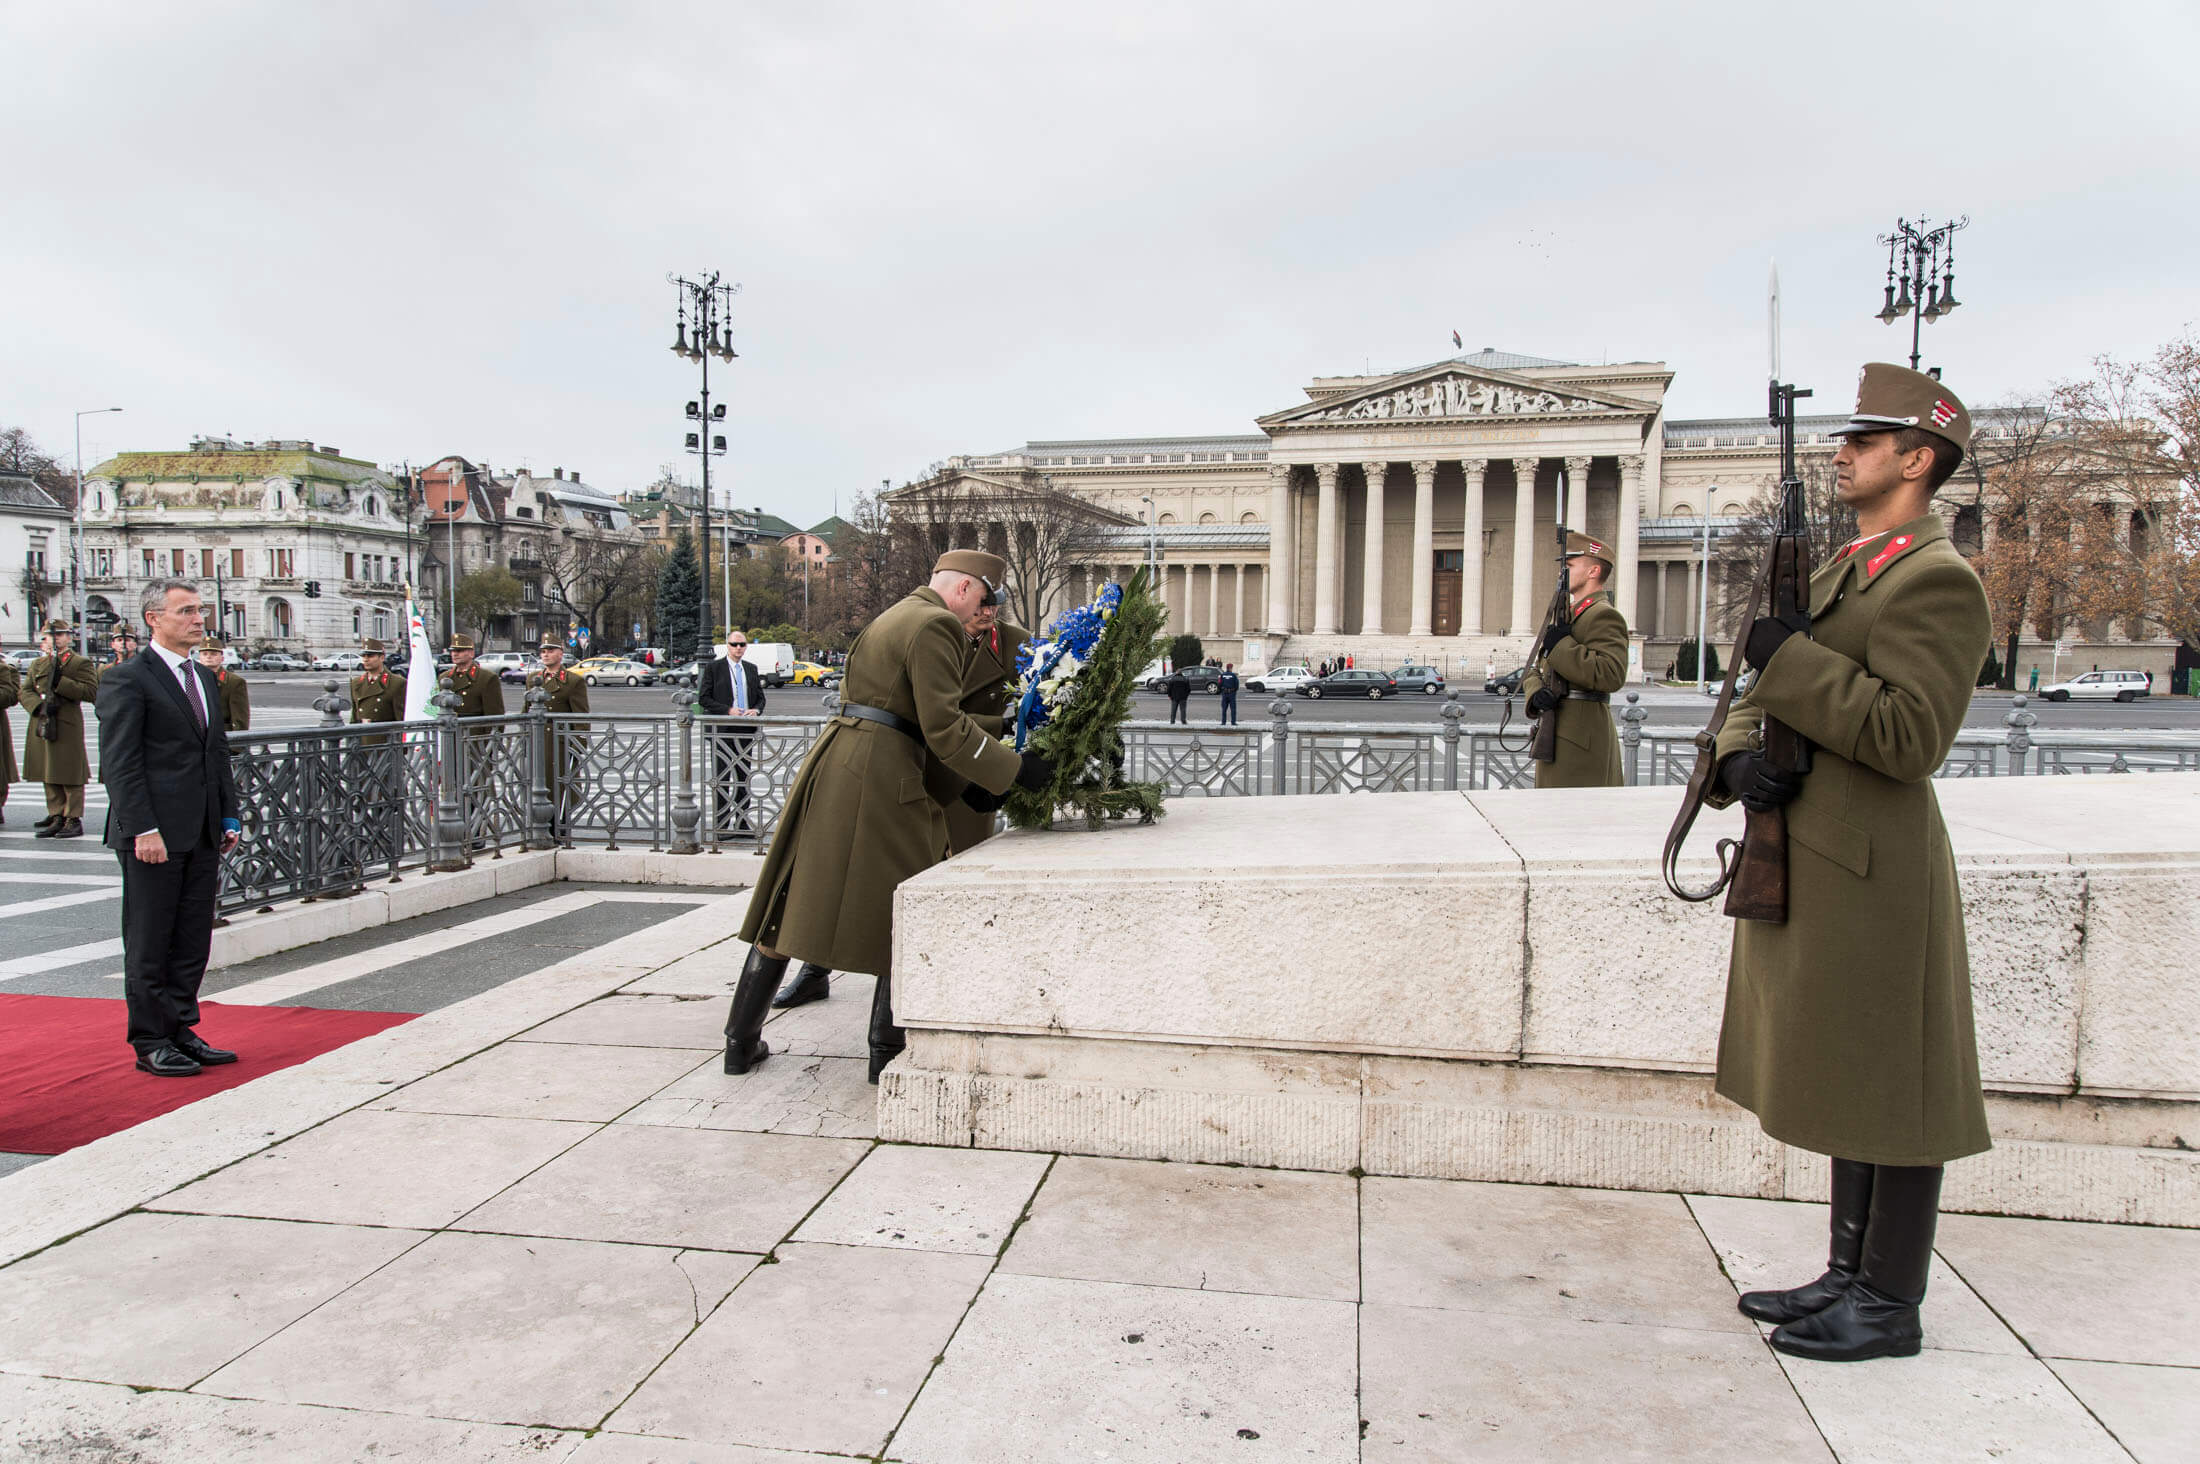 Kolen - Wreath laying ceremony at Heroes Square with NATO Secretary General Jens Stoltenberg and the Chief of Defence of Hungary, General Tibor Benko in 2015. NATO